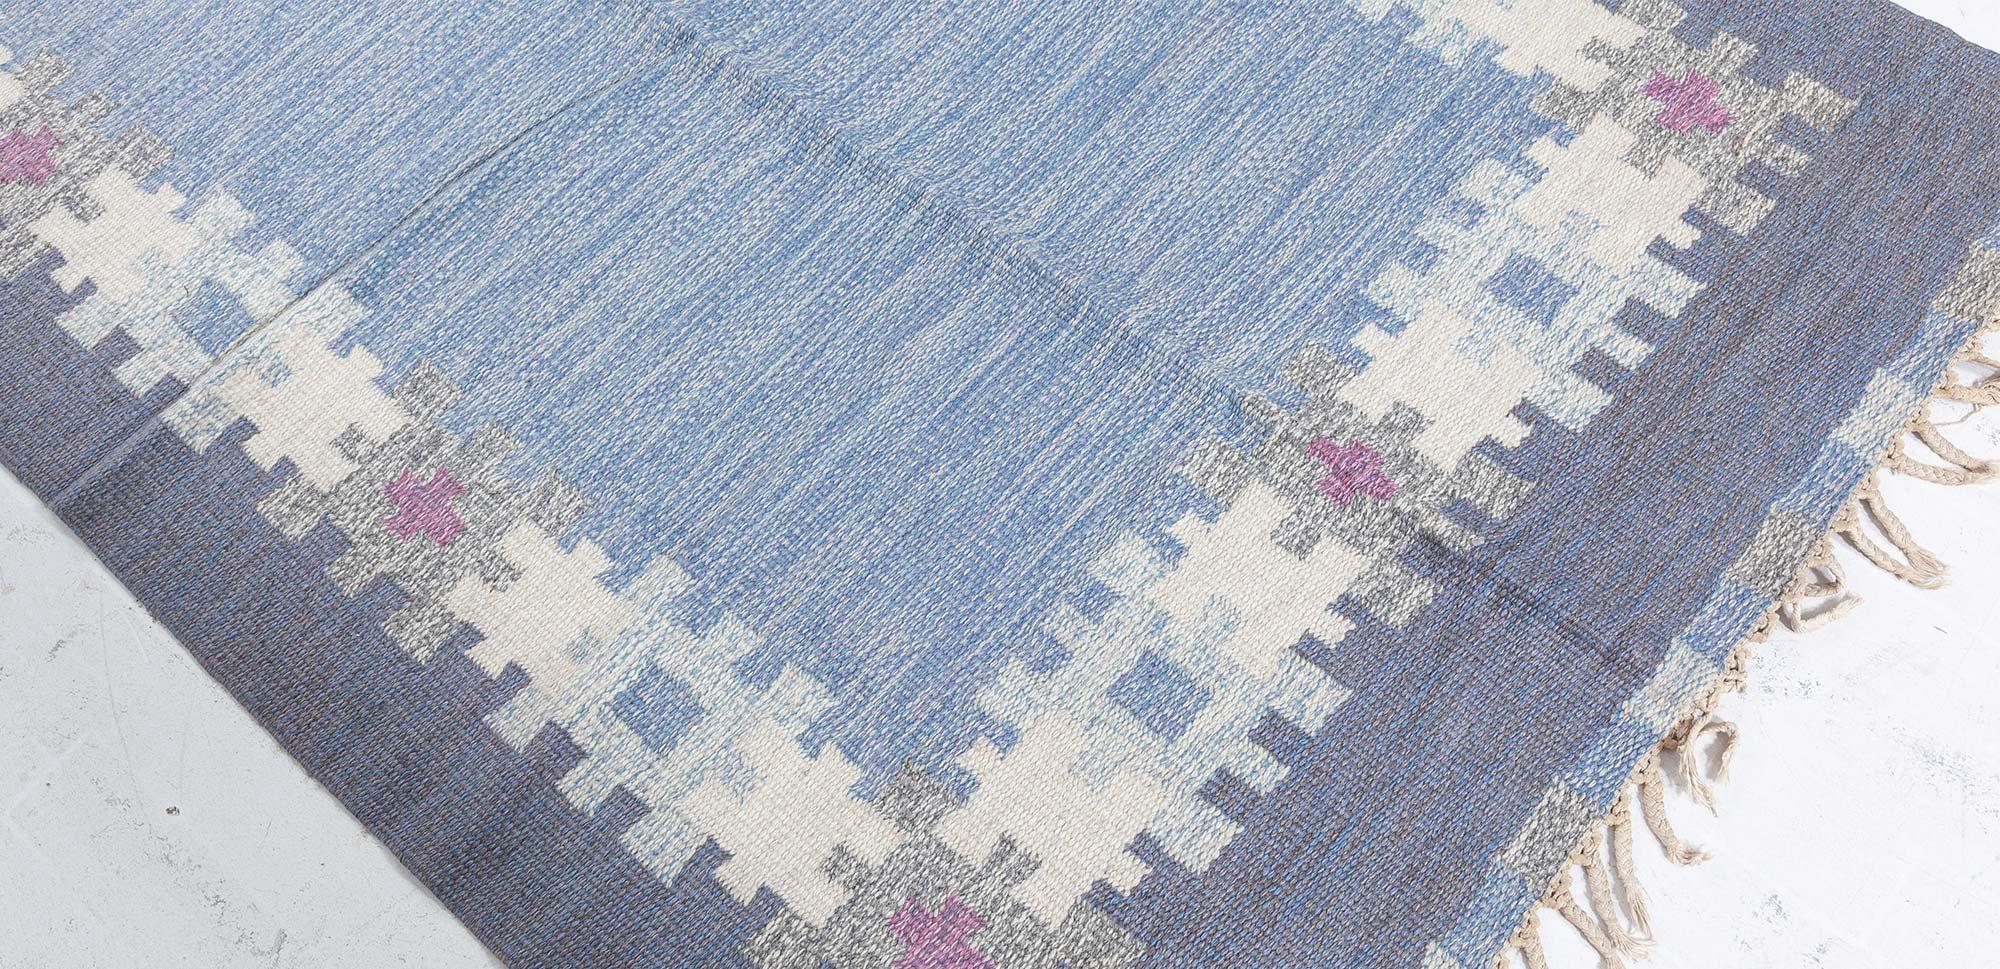 Mid-20th century blue, gray Swedish rug by Ingegerd Silow Woven I.S.
Size: 4'4